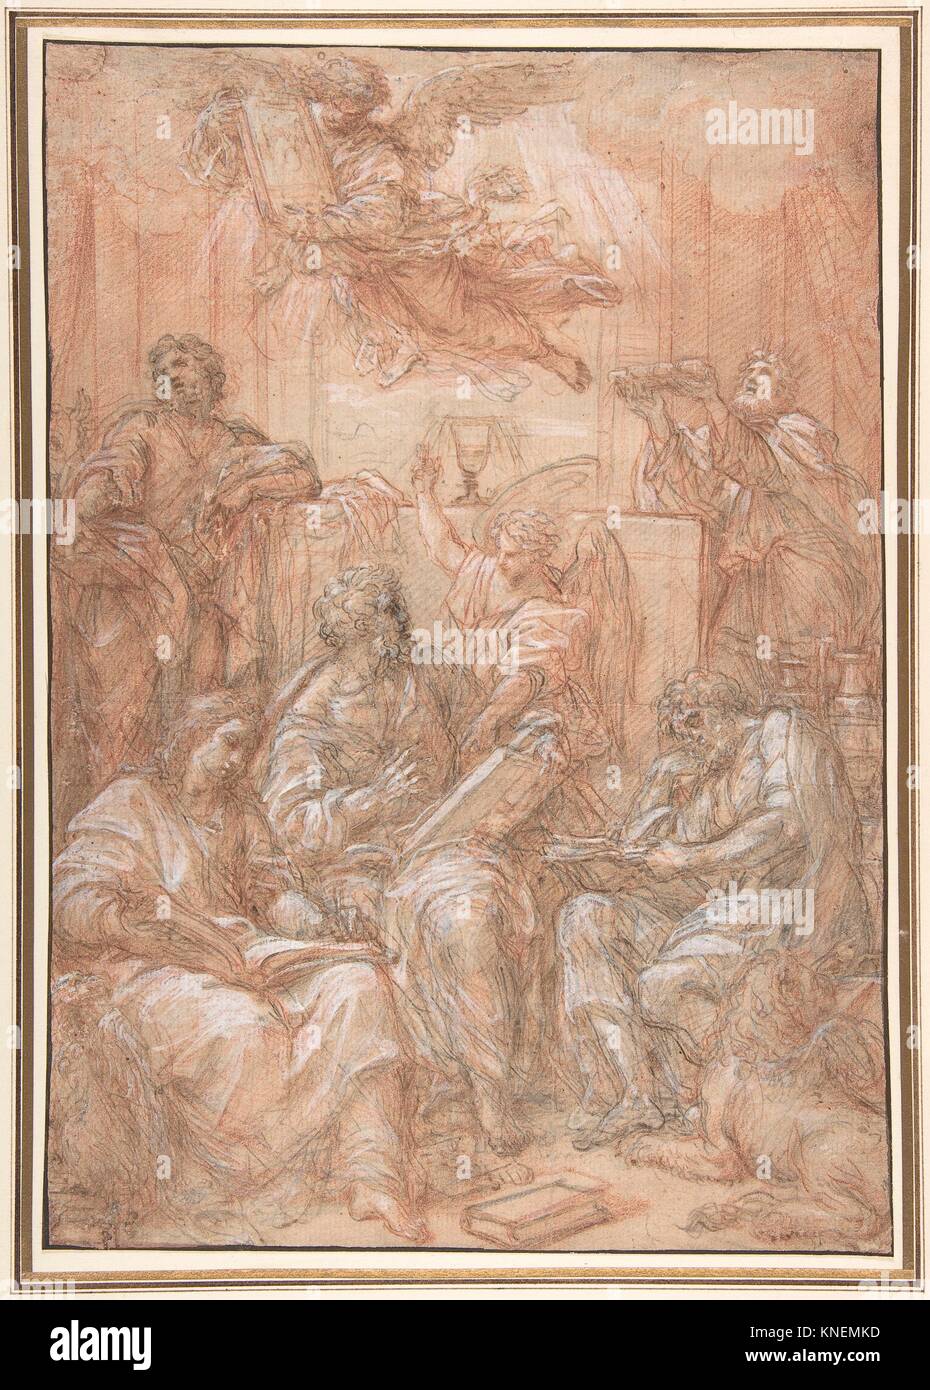 Allegory of the Old and New Dispensations. Artist: Carlo Maratti (Italian, Camerano 1625-1713 Rome); Date: 1700-1708; Medium: Pen and brown ink, over Stock Photo